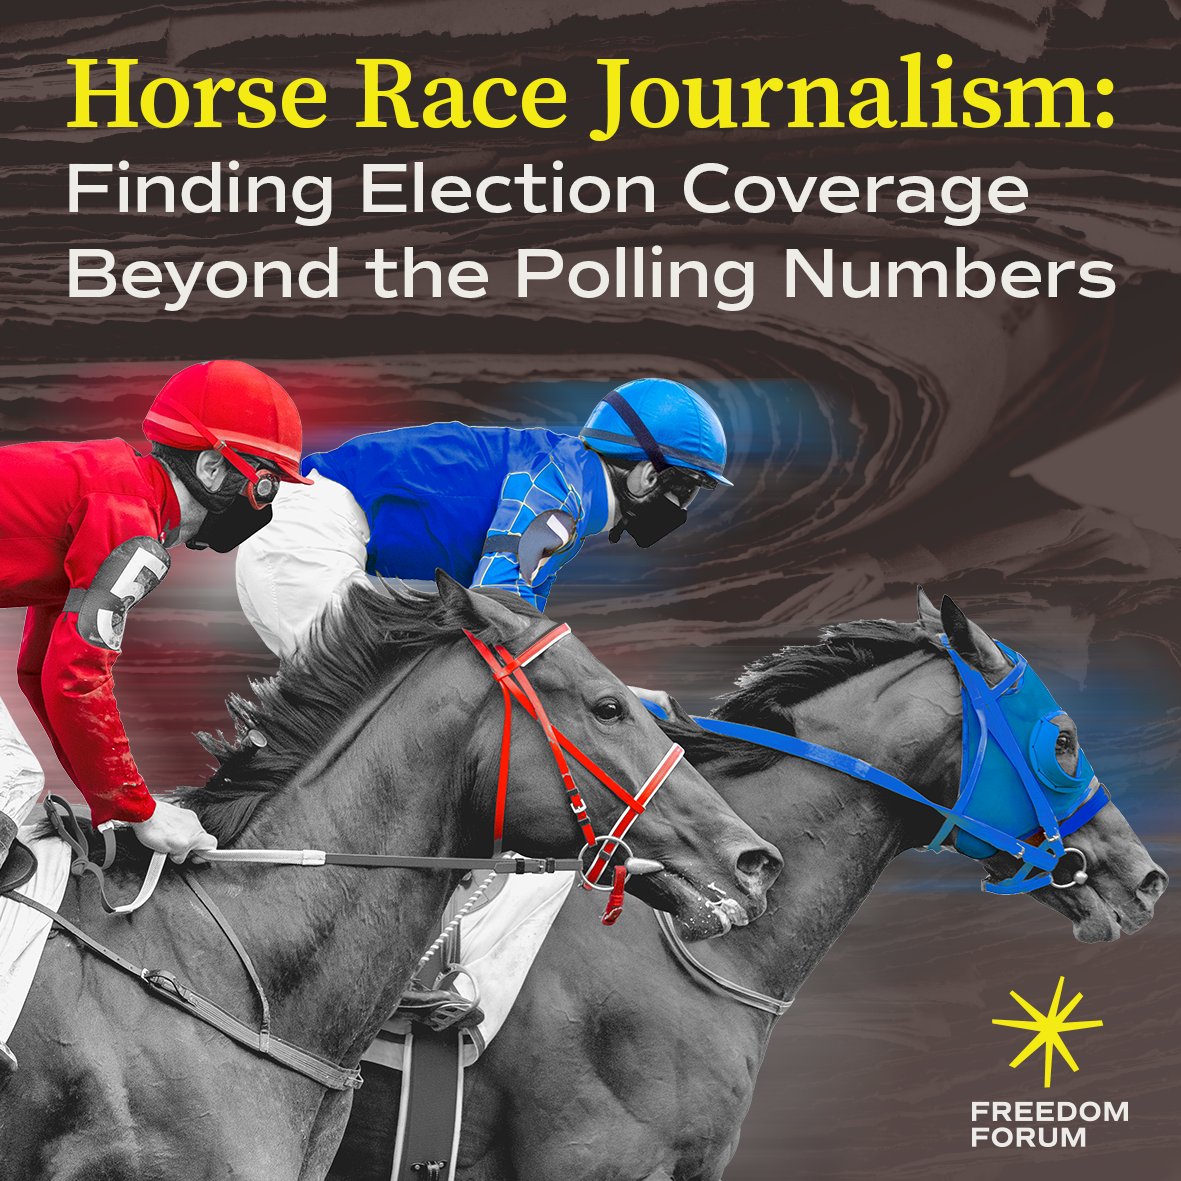 Horse racing and elections have similarities. They both have intense coverage when the field is close, the stakes are high, and there’s lots of money involved. But what is horse race journalism? Hint: It has nothing to do with the Kentucky Derby. ➡️ bit.ly/3UamYXG